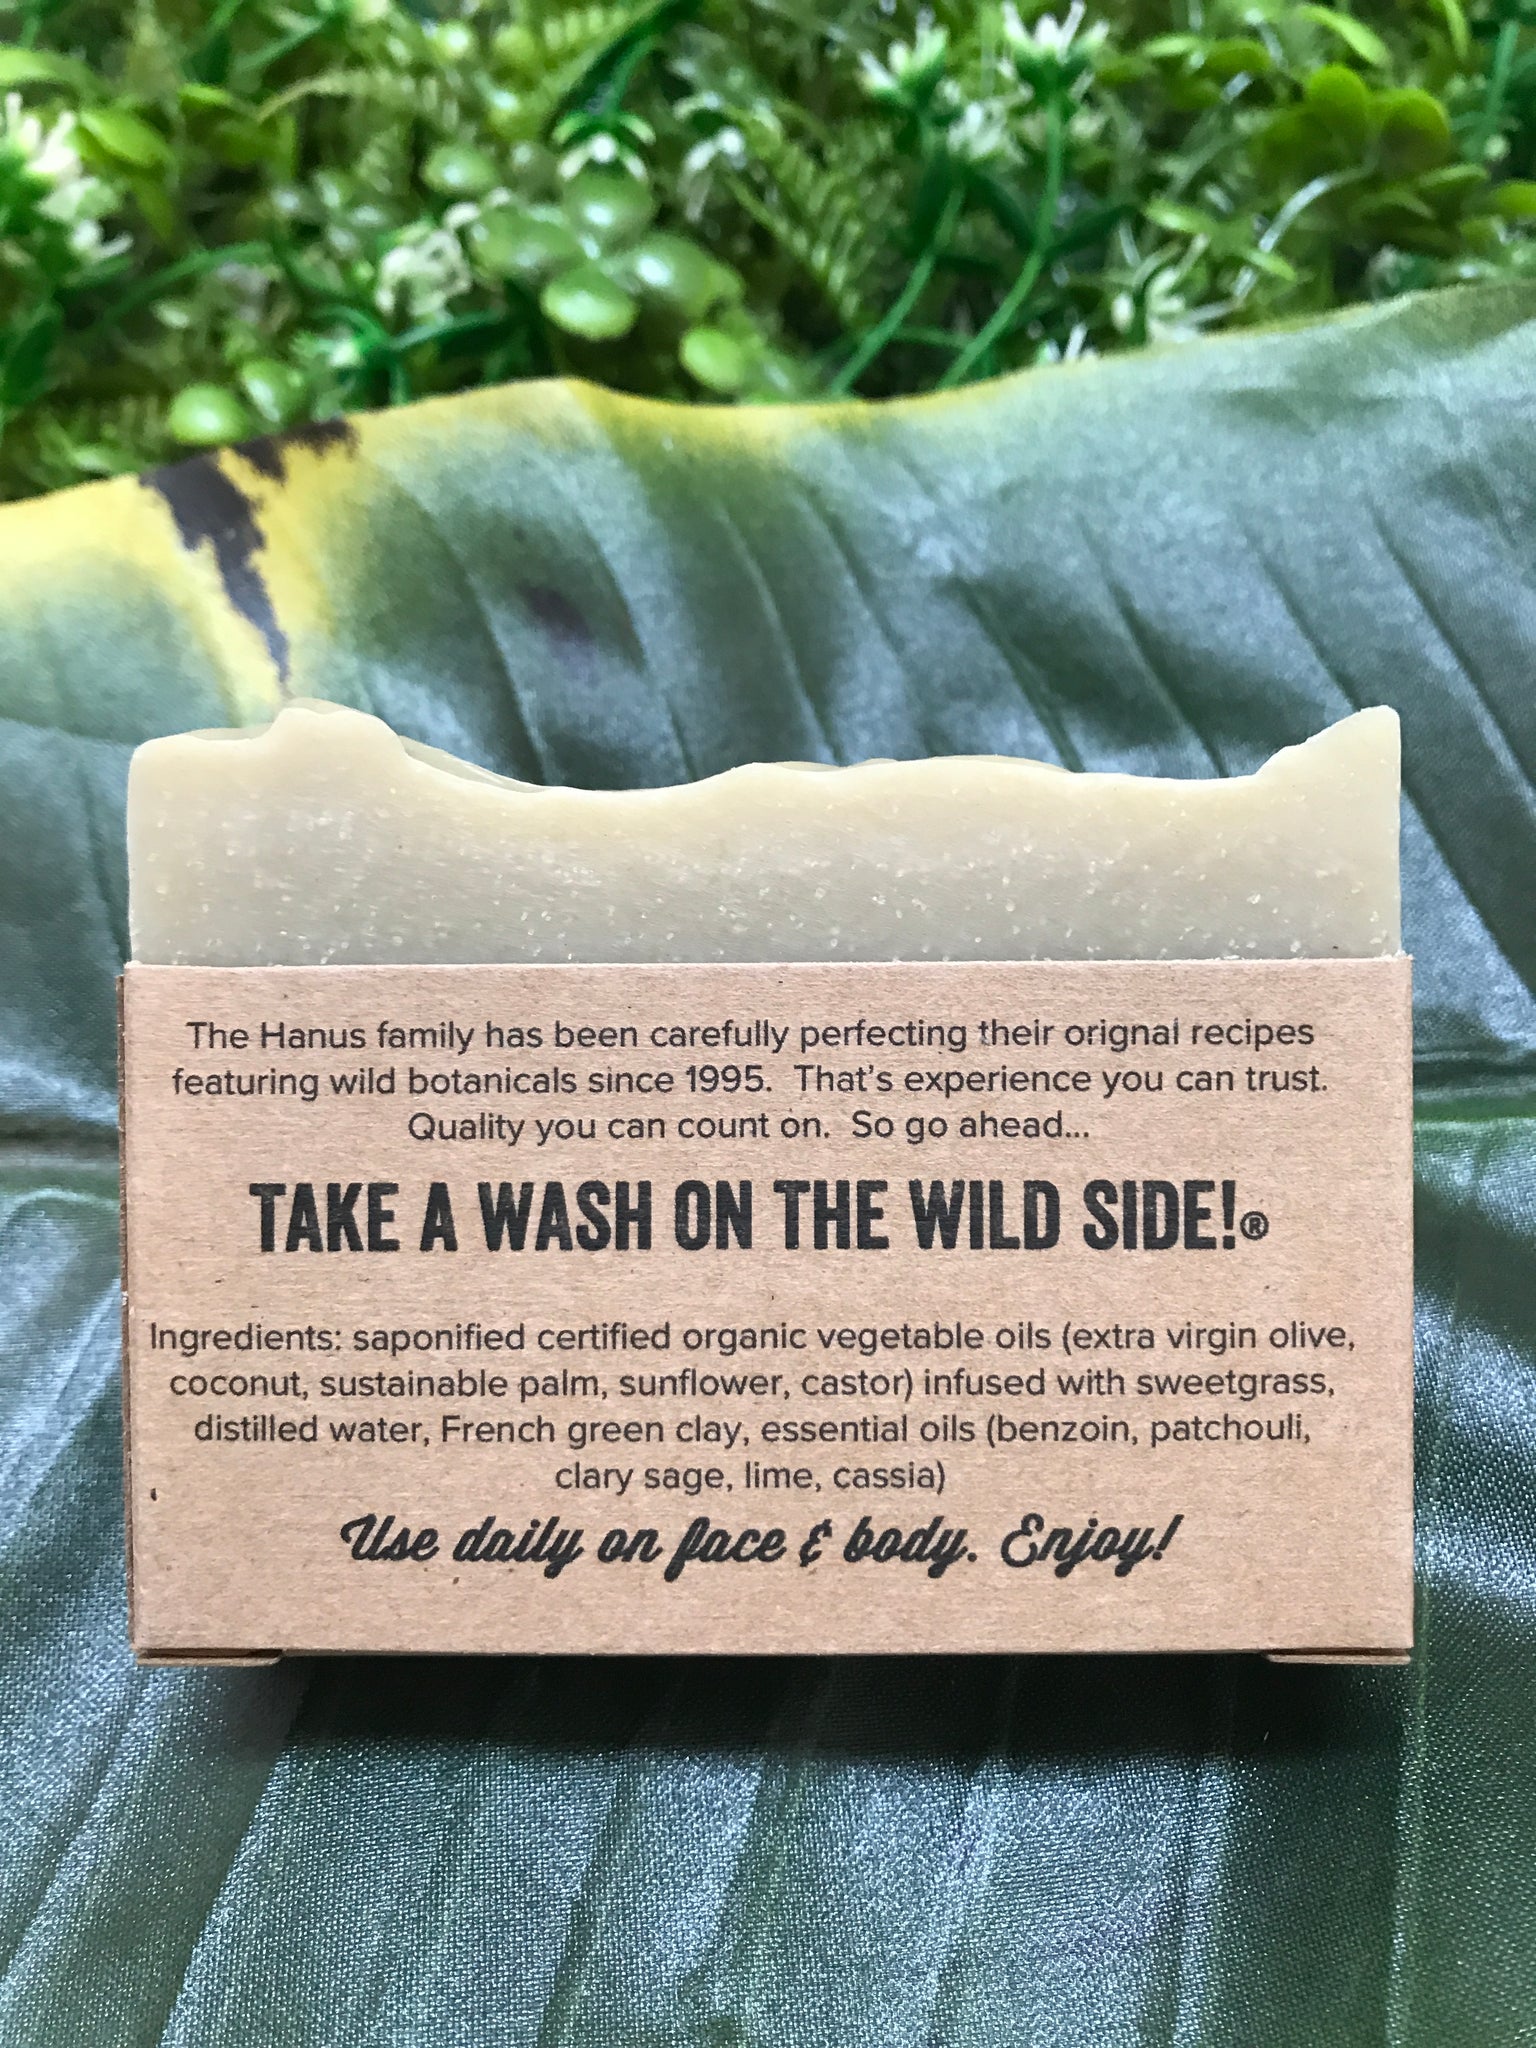 Your friendly neighborhood soap is back! Swing into freshness with